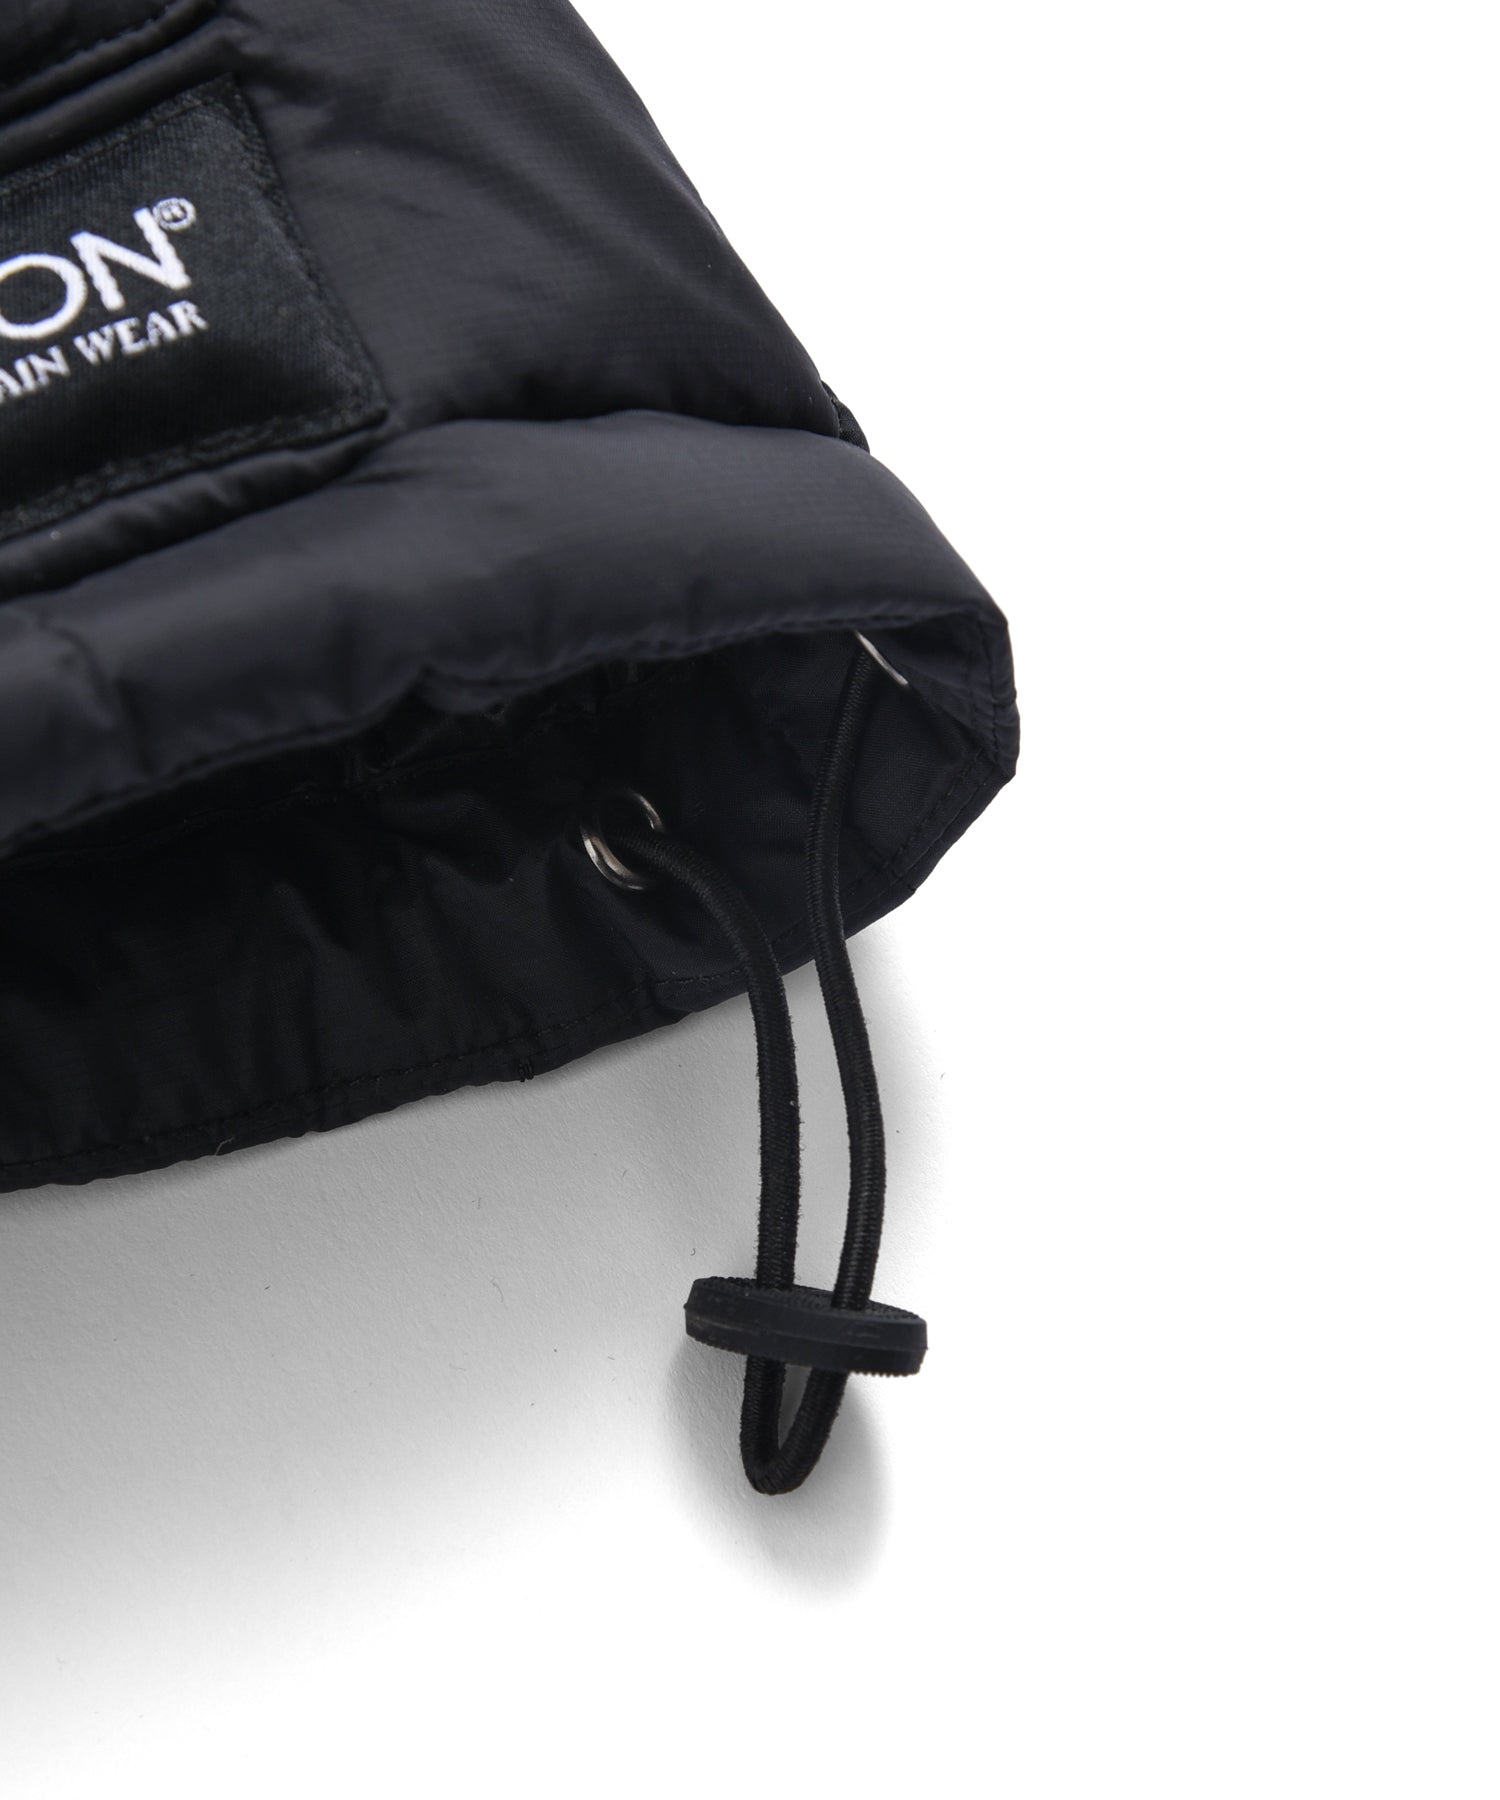 Taion 102 Mountain Packable Volume Jacket